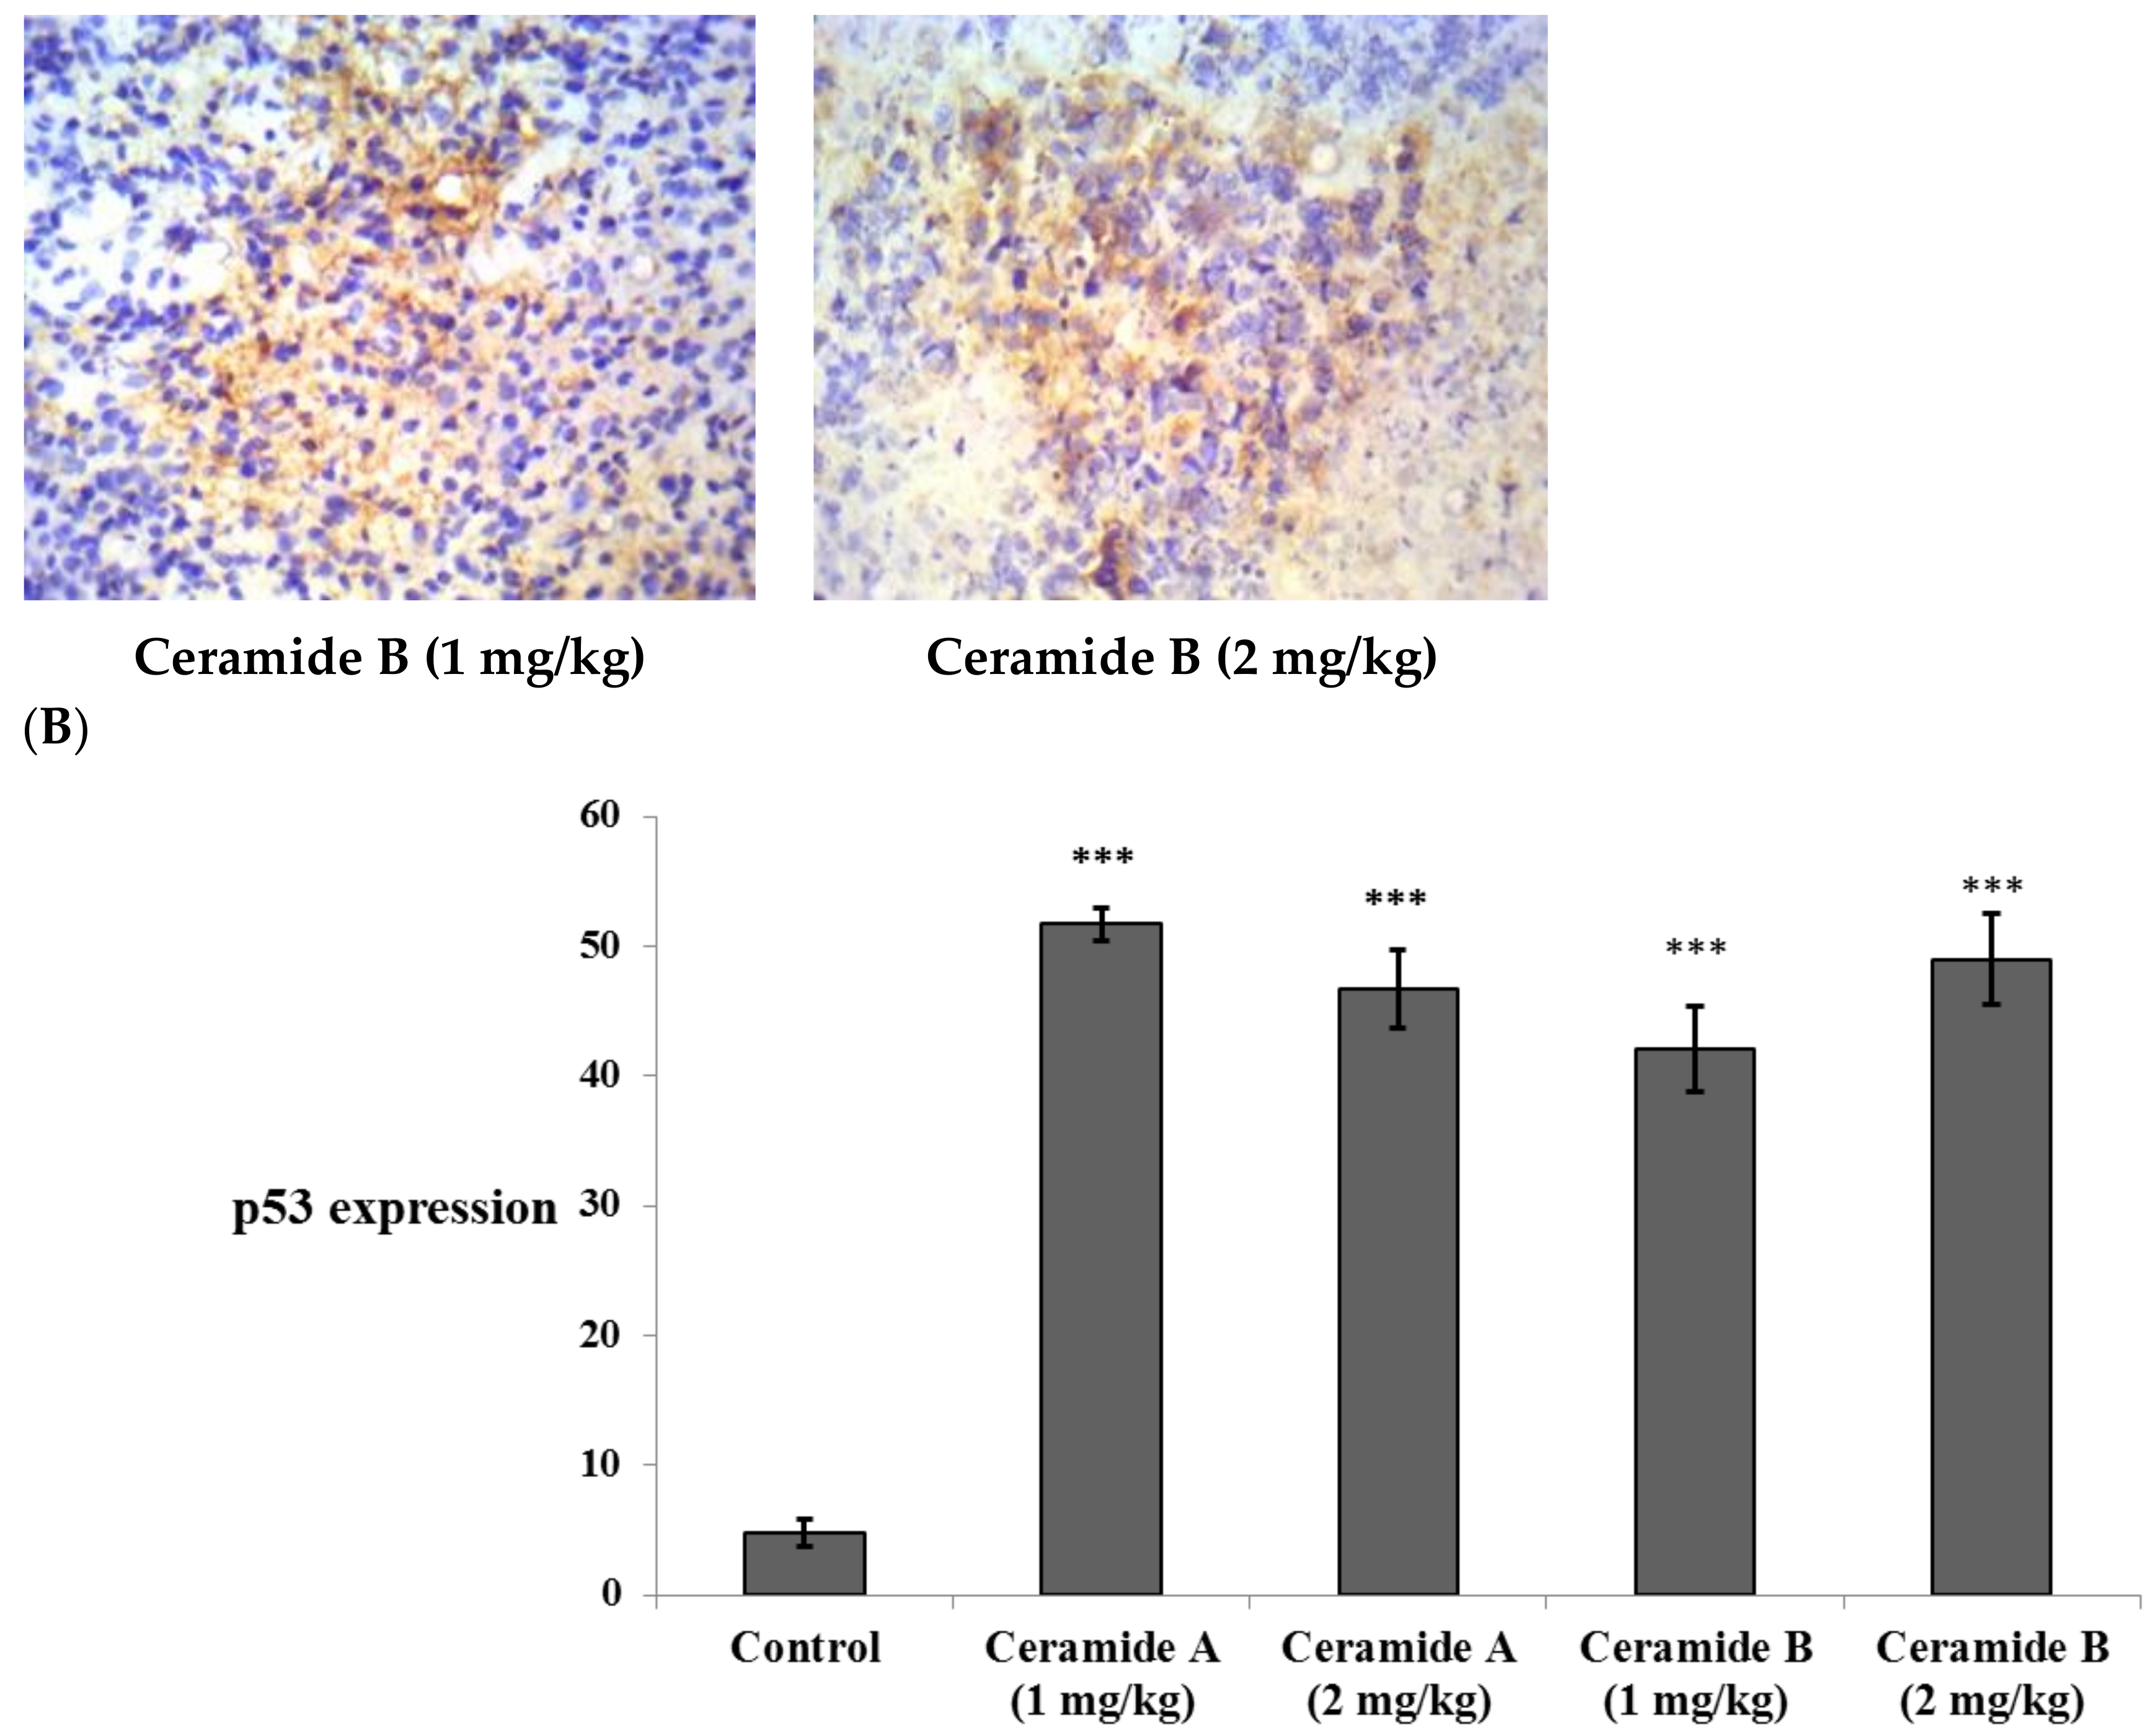 Marine Drugs | Free Full-Text | Anticancer Effects of New Ceramides  Isolated from the Red Sea Red Algae Hypnea musciformis in a Model of  Ehrlich Ascites Carcinoma: LC-HRMS Analysis Profile and Molecular Modeling